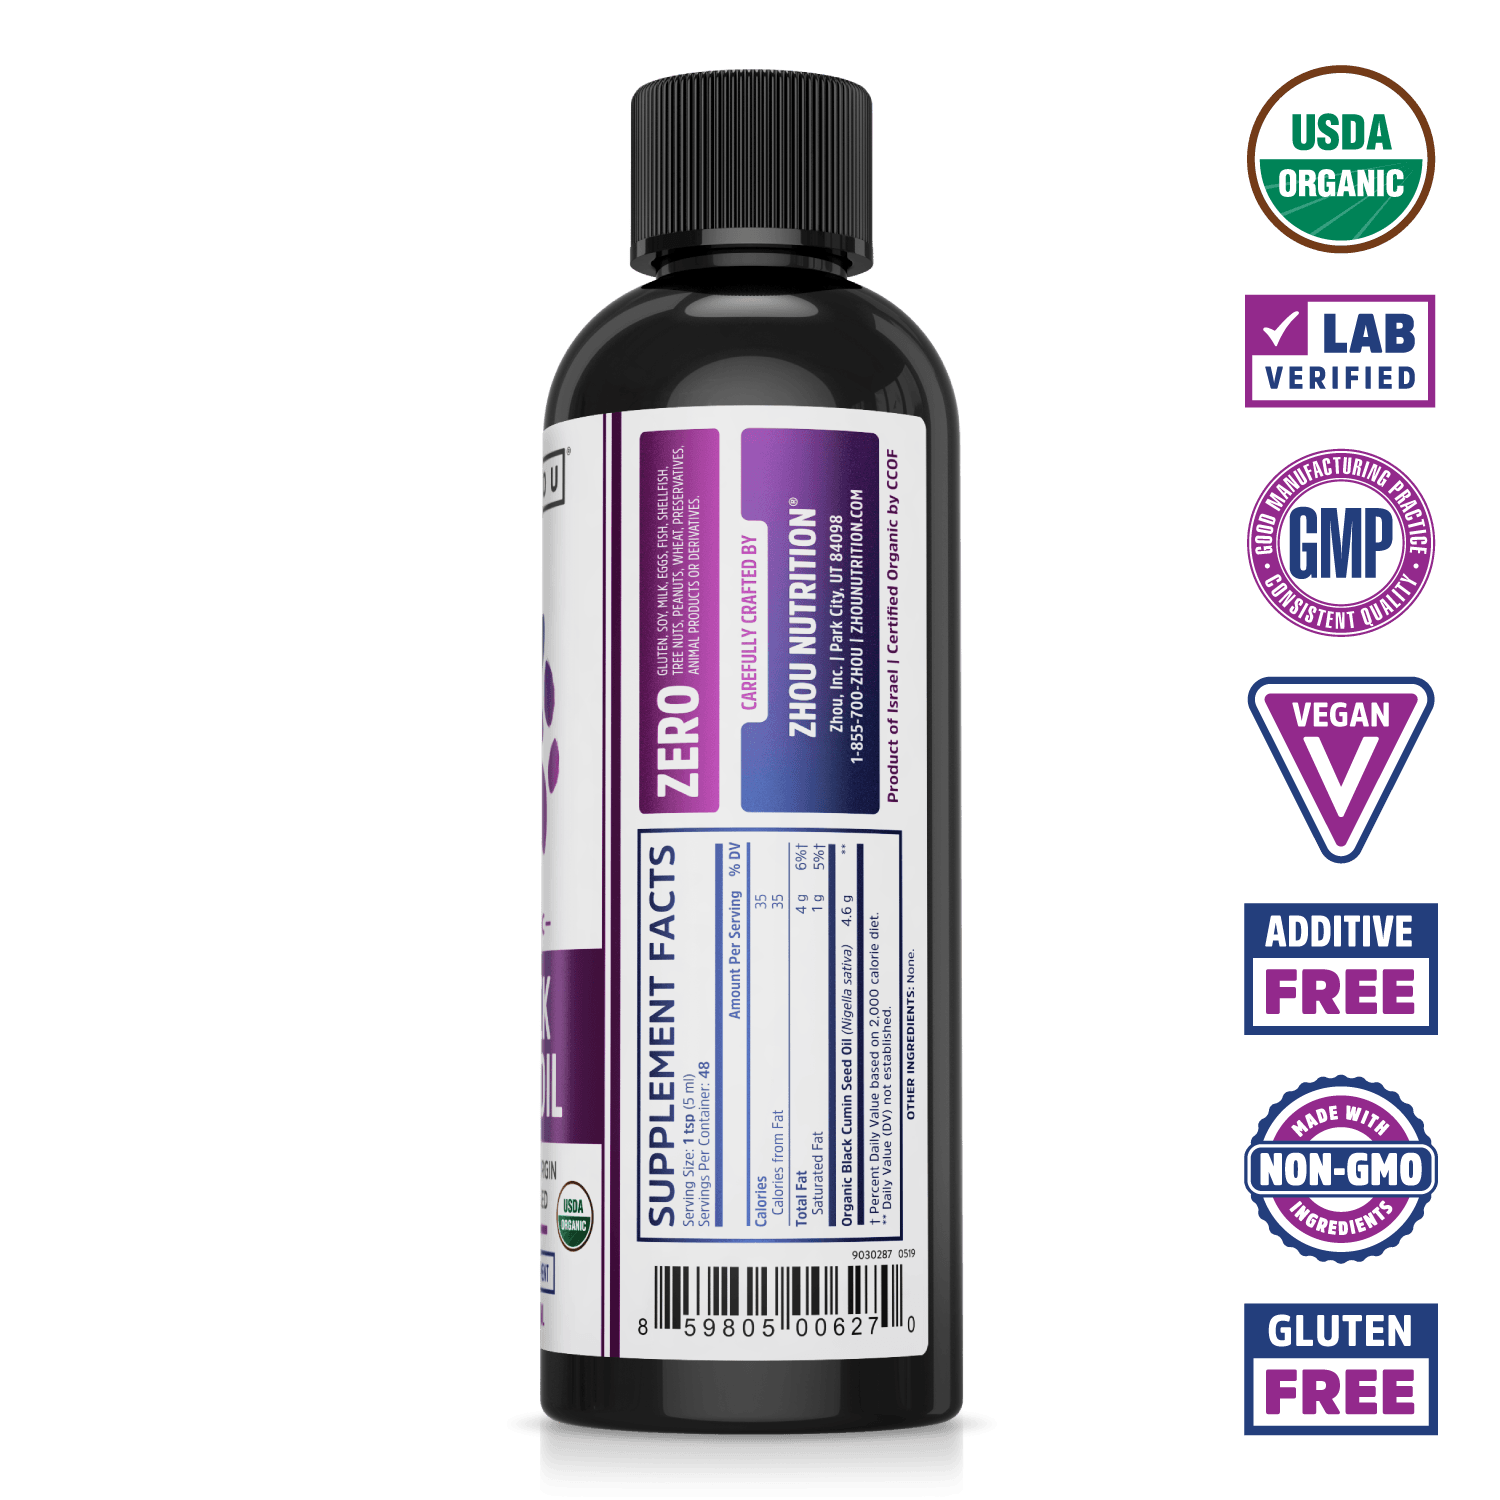 Organic, Cold-Pressed Black Seed Oil From Zhou Nutrition. Bottle side. USDA organic, lab verified, good manufacturing practices, vegan, additive free, made with non-GMO ingredients, gluten free.